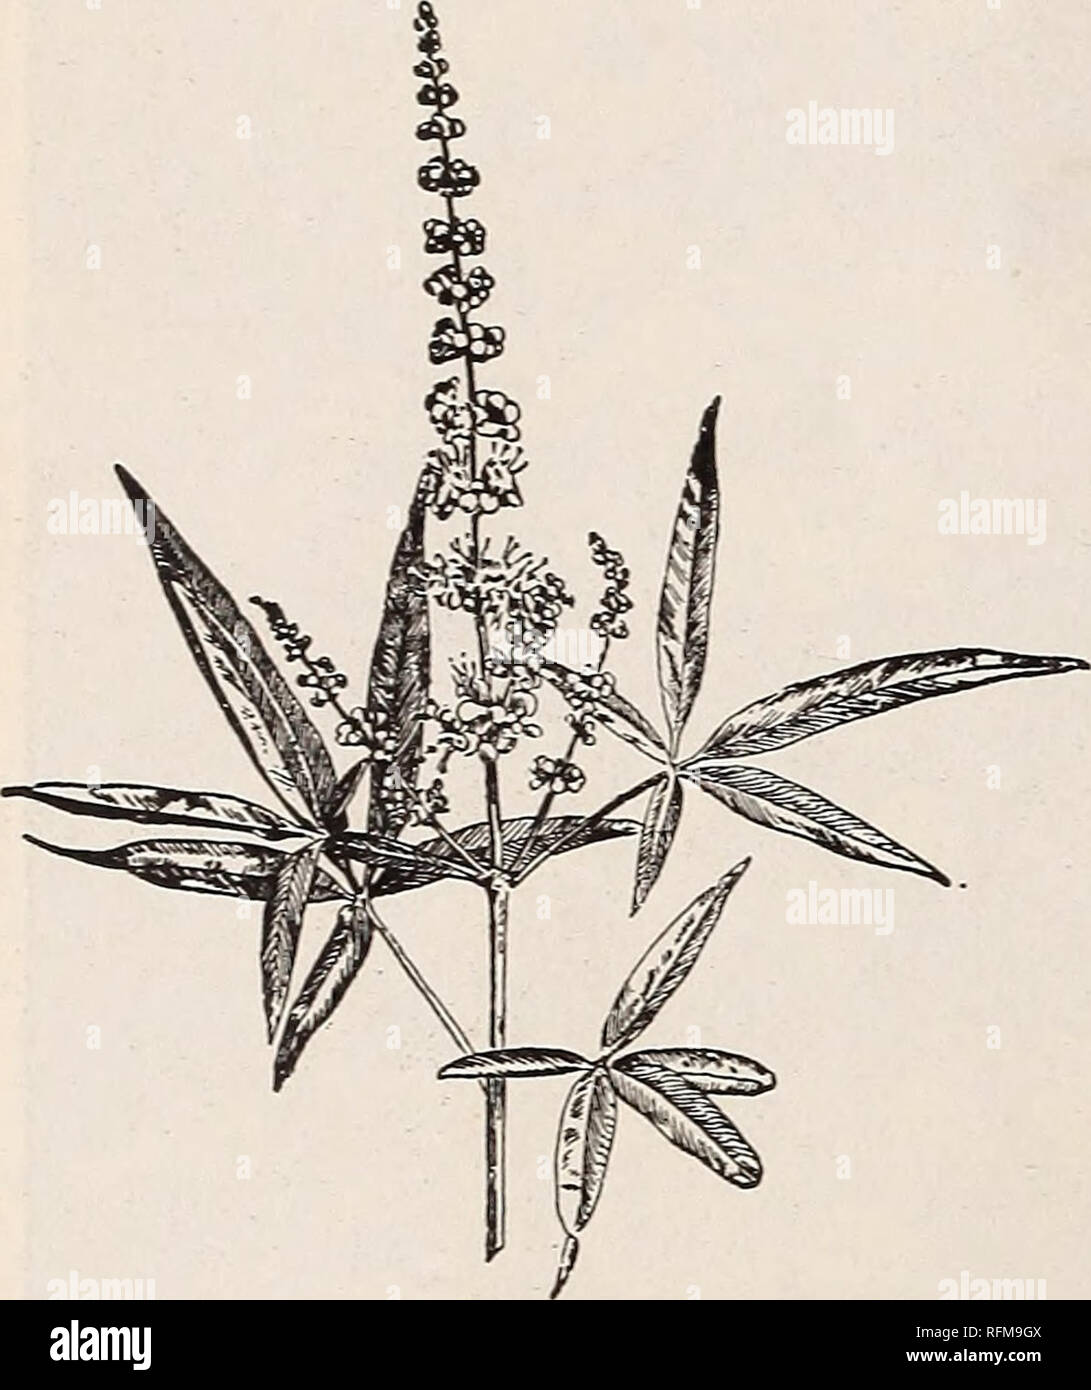 . Descriptive catalogue of ornamental trees, shrubs, vines, evergreens, hardy plants and fruits. Nurseries (Horticulture), Pennsylvania, Catalogs; Trees, Seedlings, Catalogs; Ornamental shrubs, Catalogs; Flowers, Catalogs; Plants, Ornamental, Catalogs; Fruit, Catalogs. VITBX. Chaste Shrub. ViteX agnUS-CaStUS. (3t04ft.) This is a v^!uable shrub because of its flowering in August and September when but few shrubs are in bloom. The flowers are in loose panicles, lilac in color. 18 to 24 in. Trans $ 35 each $2 00 per 10 3 ft. &quot; very bushy 50 '' &quot; var. alba. (3 to 4 ft-) white flowers. 2  Stock Photo